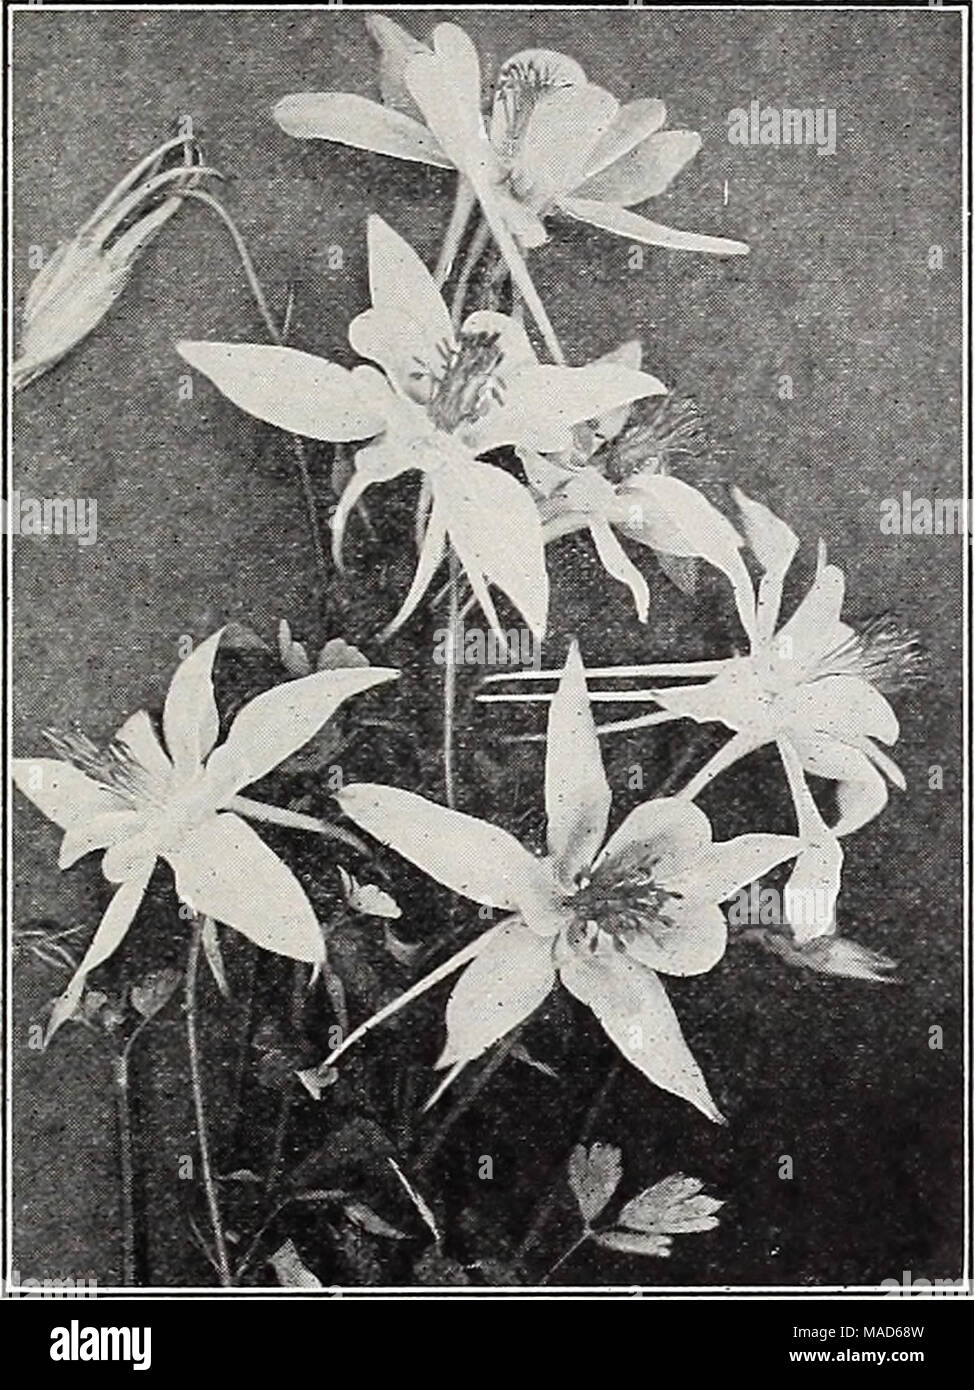 . Dreer's special mid-summer offer for florists 1921 : reliable flower seeds flor florists bulbs for florists . LONG-SPURRED HYBRID AQUILEGIA Aquilegia (Columbine) Tr. pkt. Oz. Californlca Hybrida. Mixed colors 60 $2 60 Canadensis. Scarlet and yellow 25 1 00 Chrysantha. Yellow 40 2 00 Ccerulea. Blue and white ... 40 2 00 Helenae Dwarf. Blue and white 30 1 60 Nlvea Qrandlflora. Large white 20 75 Vulgaris. Violet-blue 10 25 Dreer'i Long Spurred Hybrids. Mixed colors ... 30 1 50 Single, mixed 10 40 Double, mixed 15 60 Campanula (Bellflower) Carpatlca. Blue 26 1 00 Alba. White 25 1 00 Latlfolia Mi Stock Photo